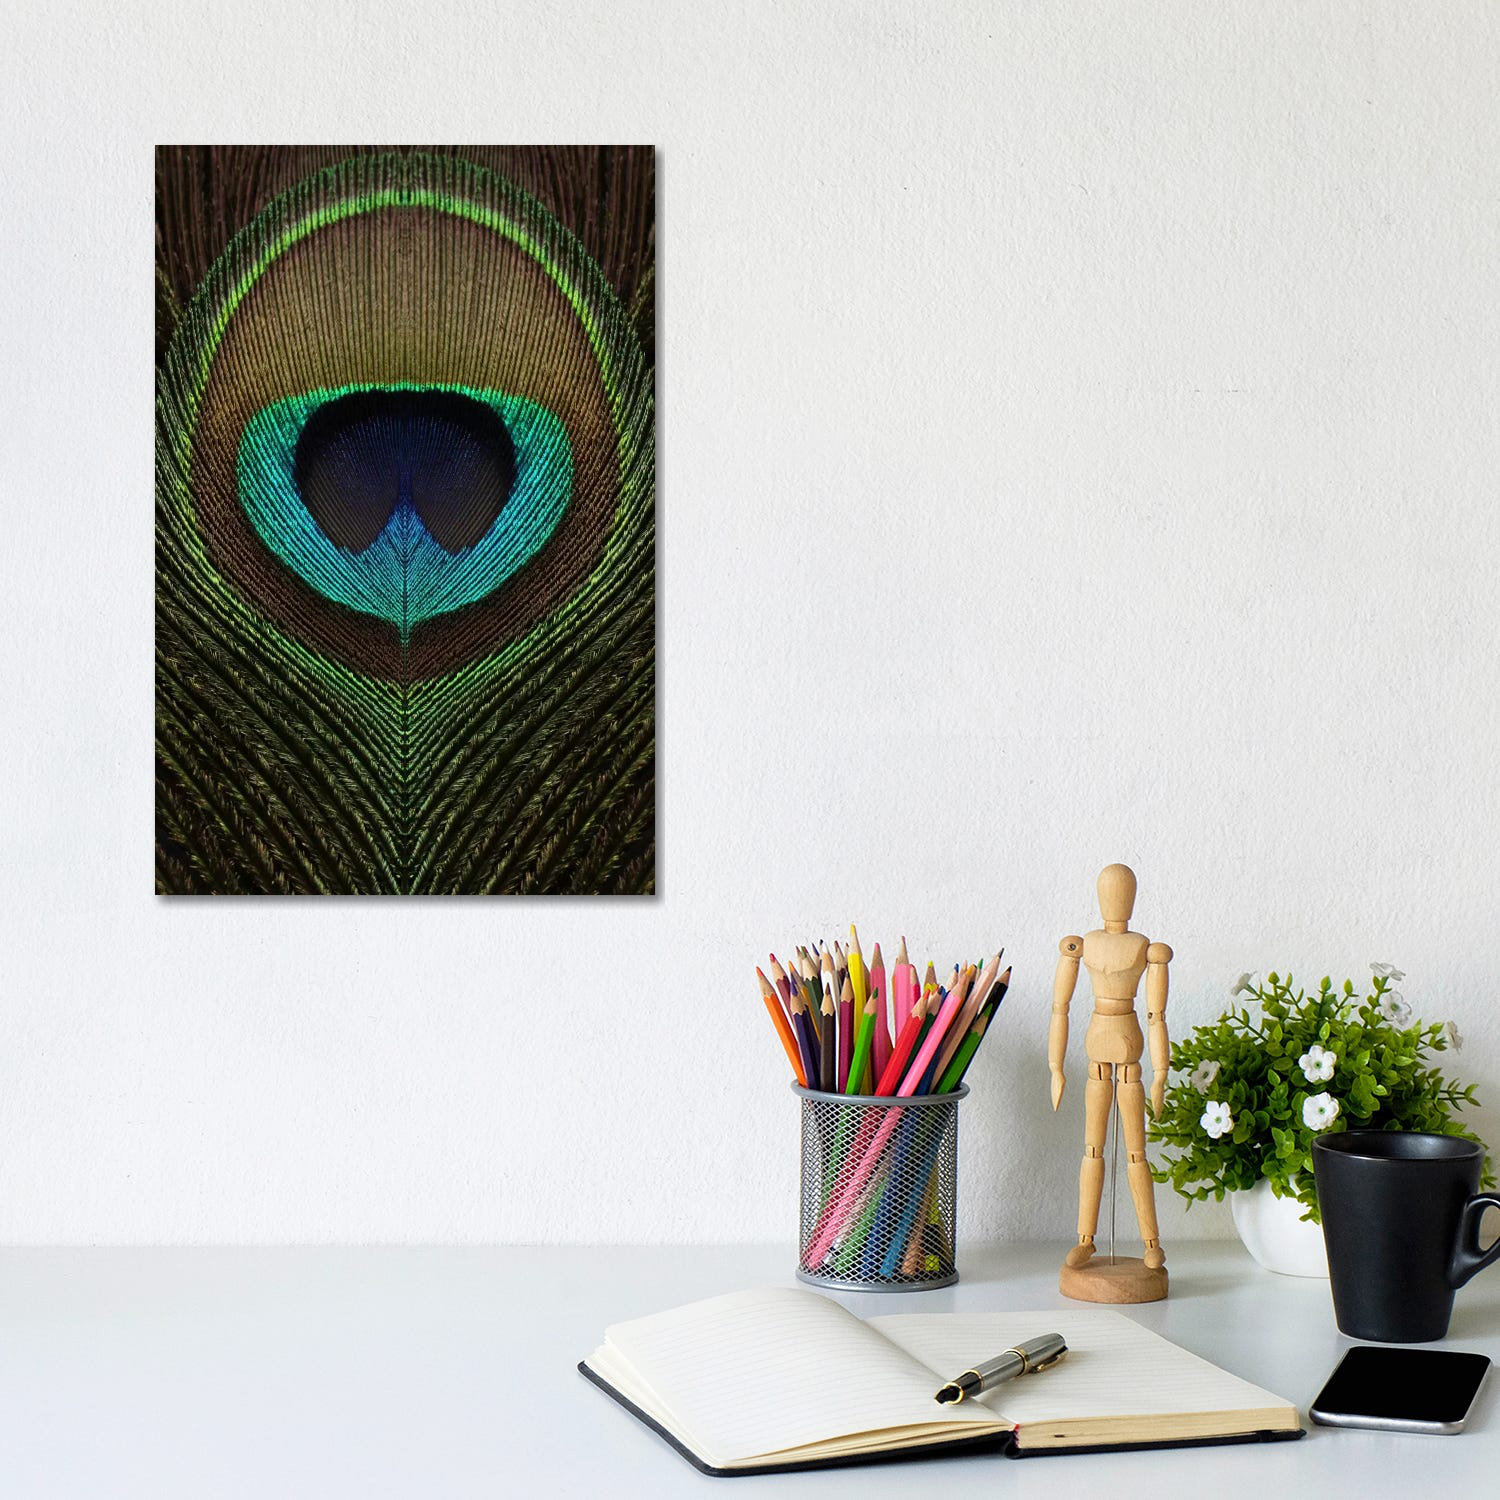 Framed Canvas Art (Gold Floating Frame) - Peacock Feather Symmetry I by Alyson Fennell ( Decorative Elements > Feathers art) - 40x26 in